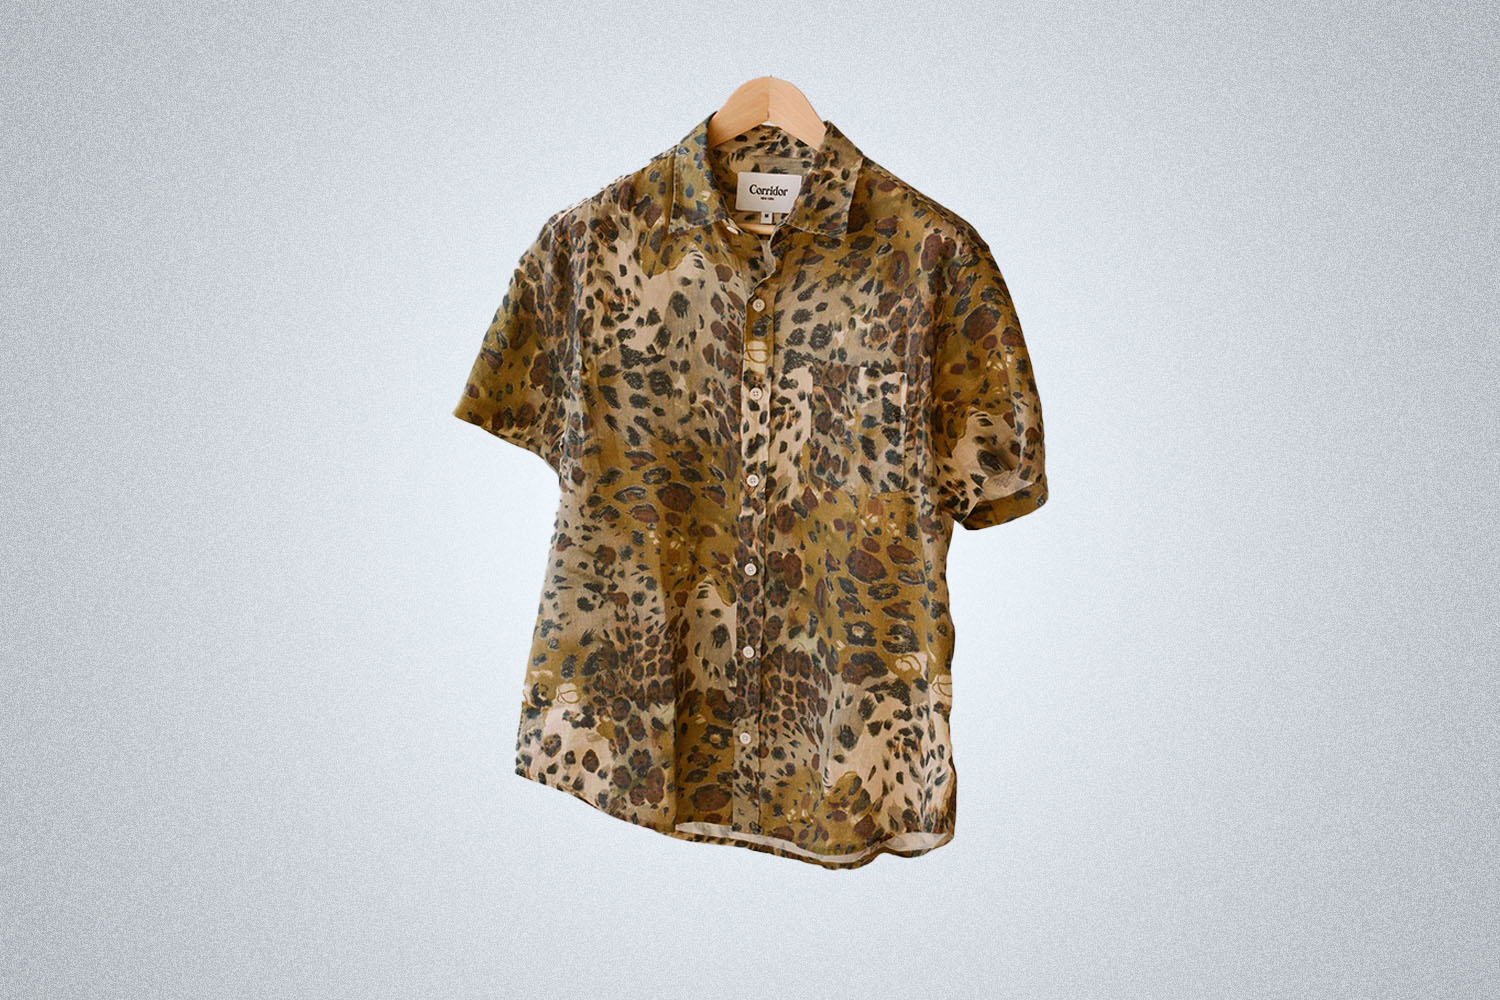 a tiger printed shirt from Corridor on a grey background